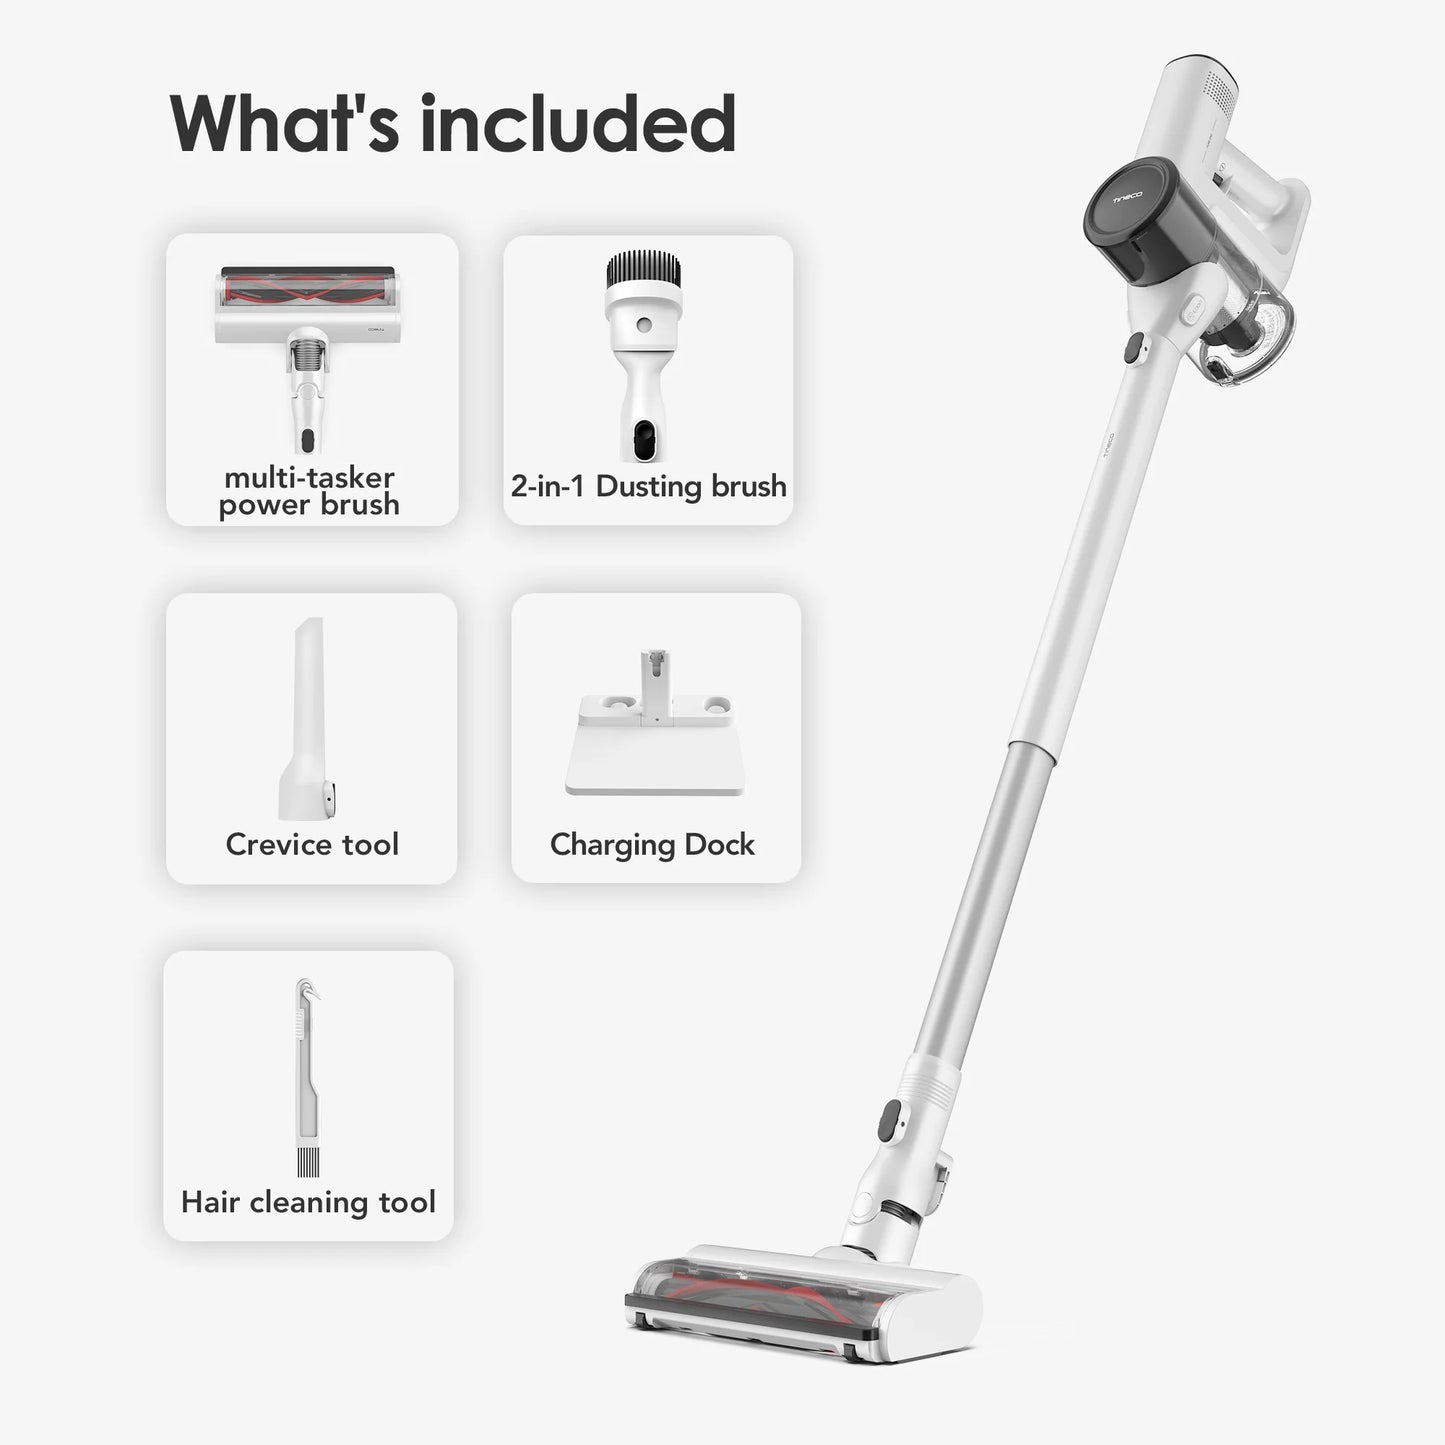 Tineco Pure One Air Cordless Vacuum Cleaner for Home Mop Super Lightweight Wireless Quiet Powerful